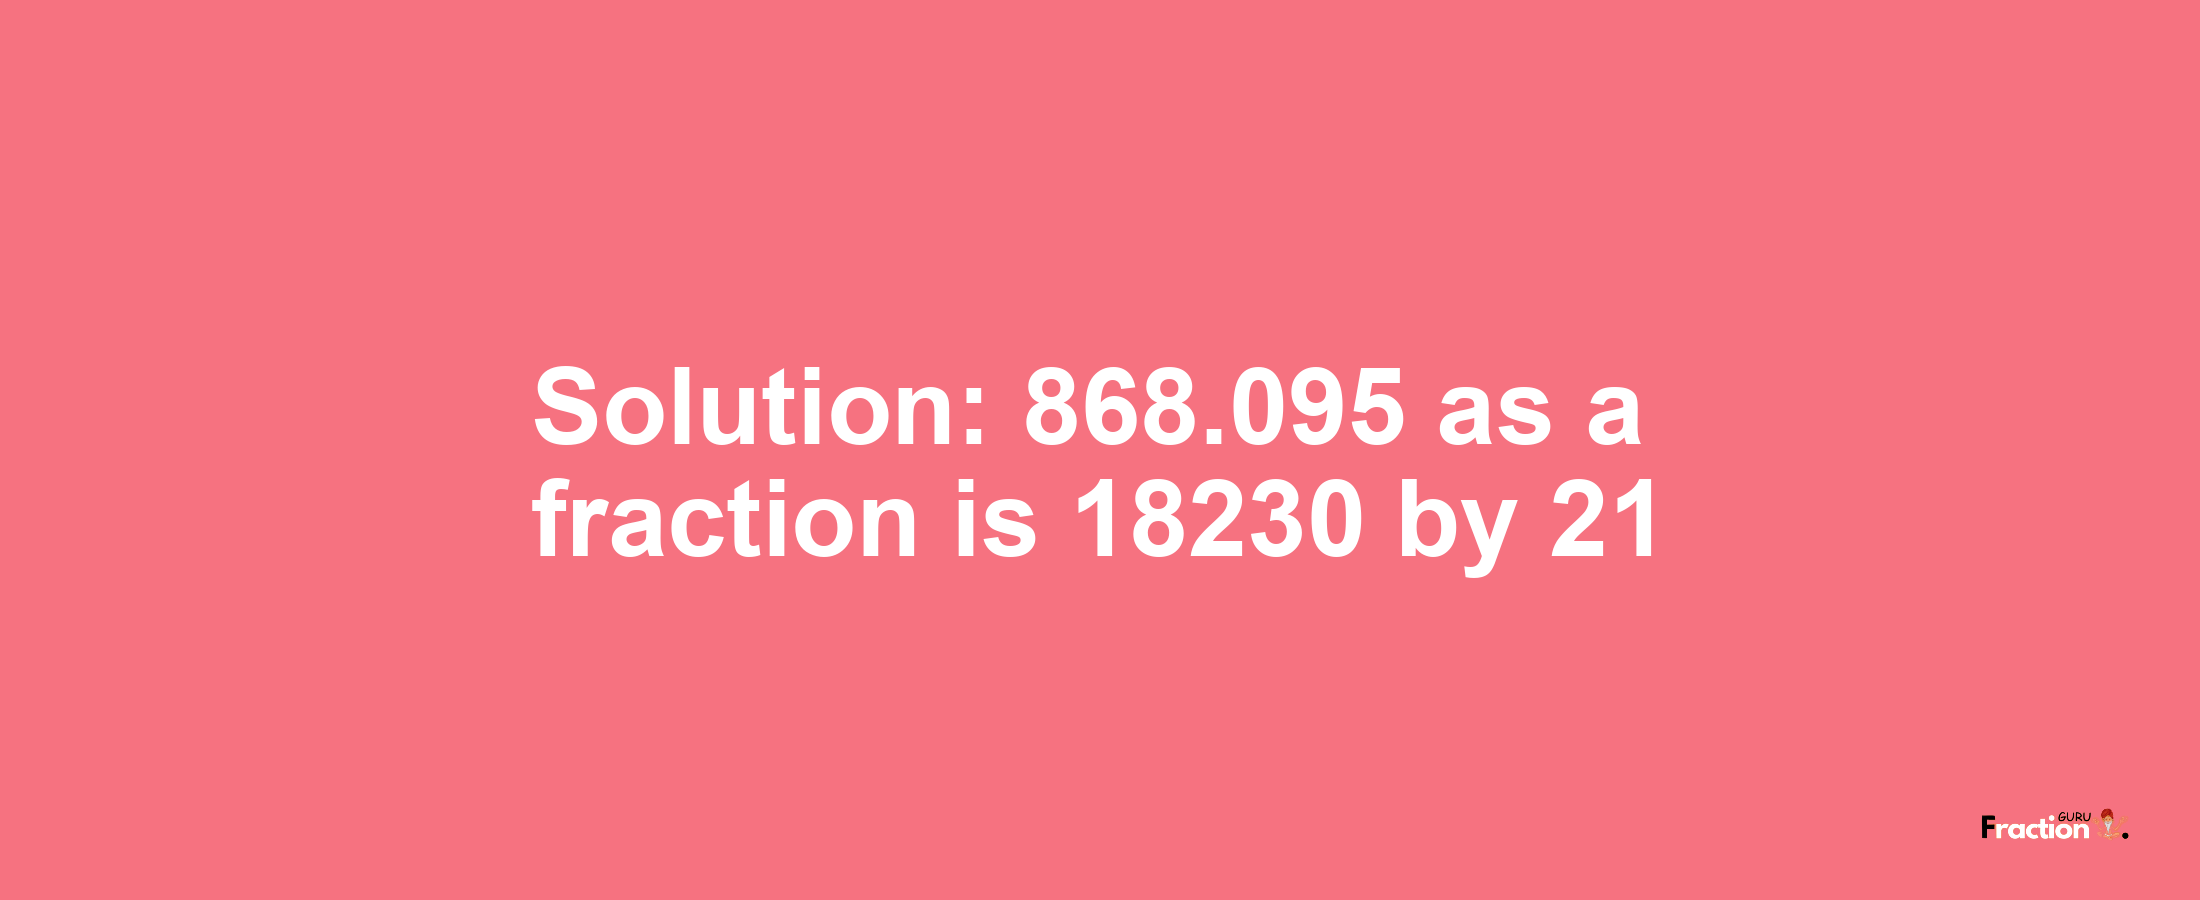 Solution:868.095 as a fraction is 18230/21